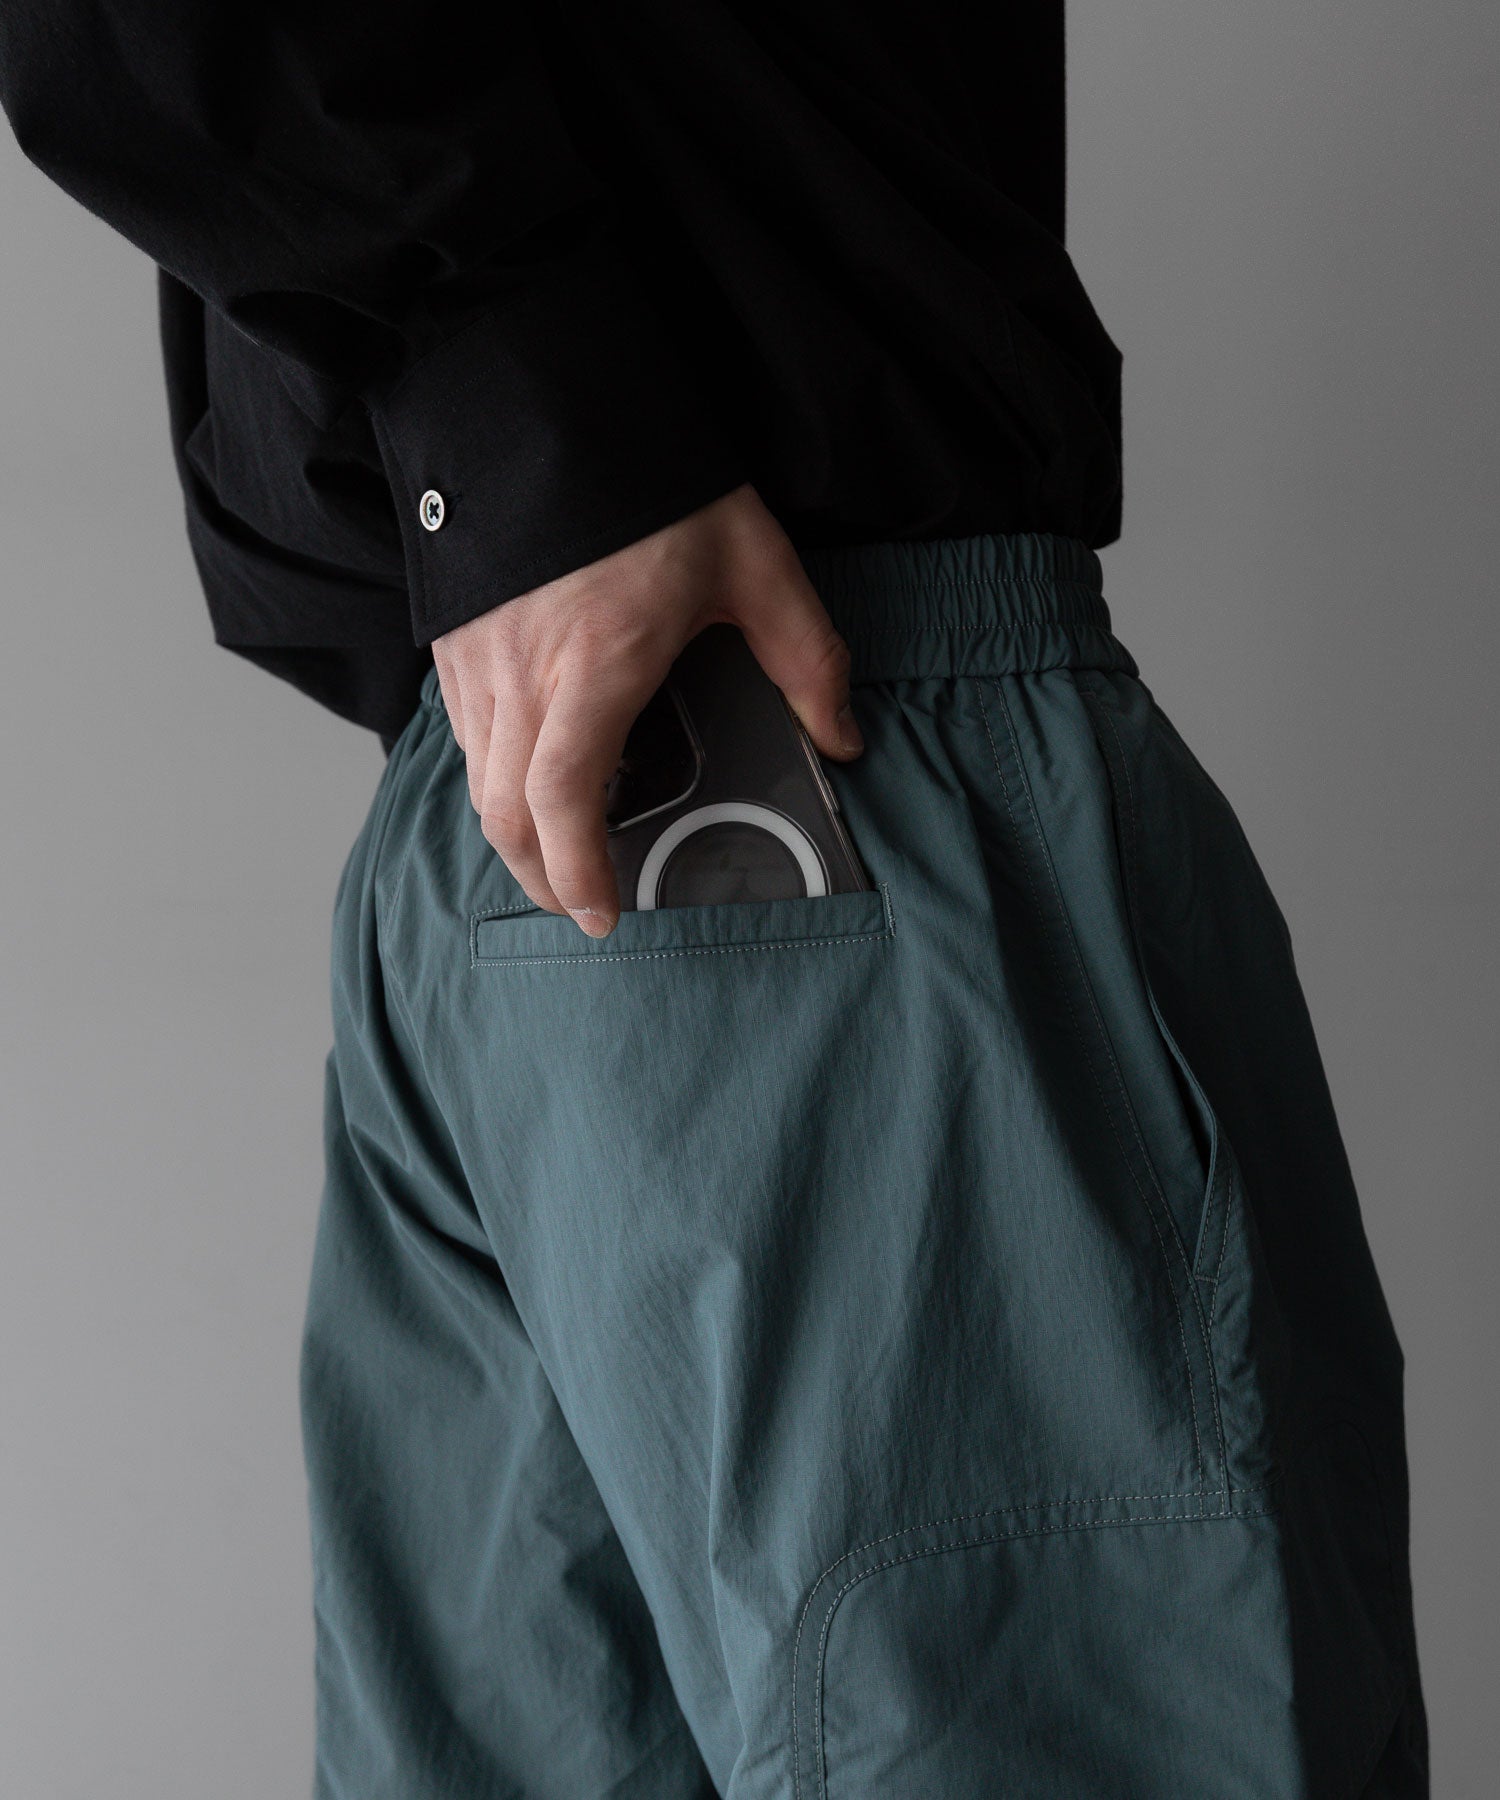 【NEITHERS】ネイダースのUNDERCOVER COACH PANTS - SAGE GREEN公式通販サイトsession福岡セレクトショップ